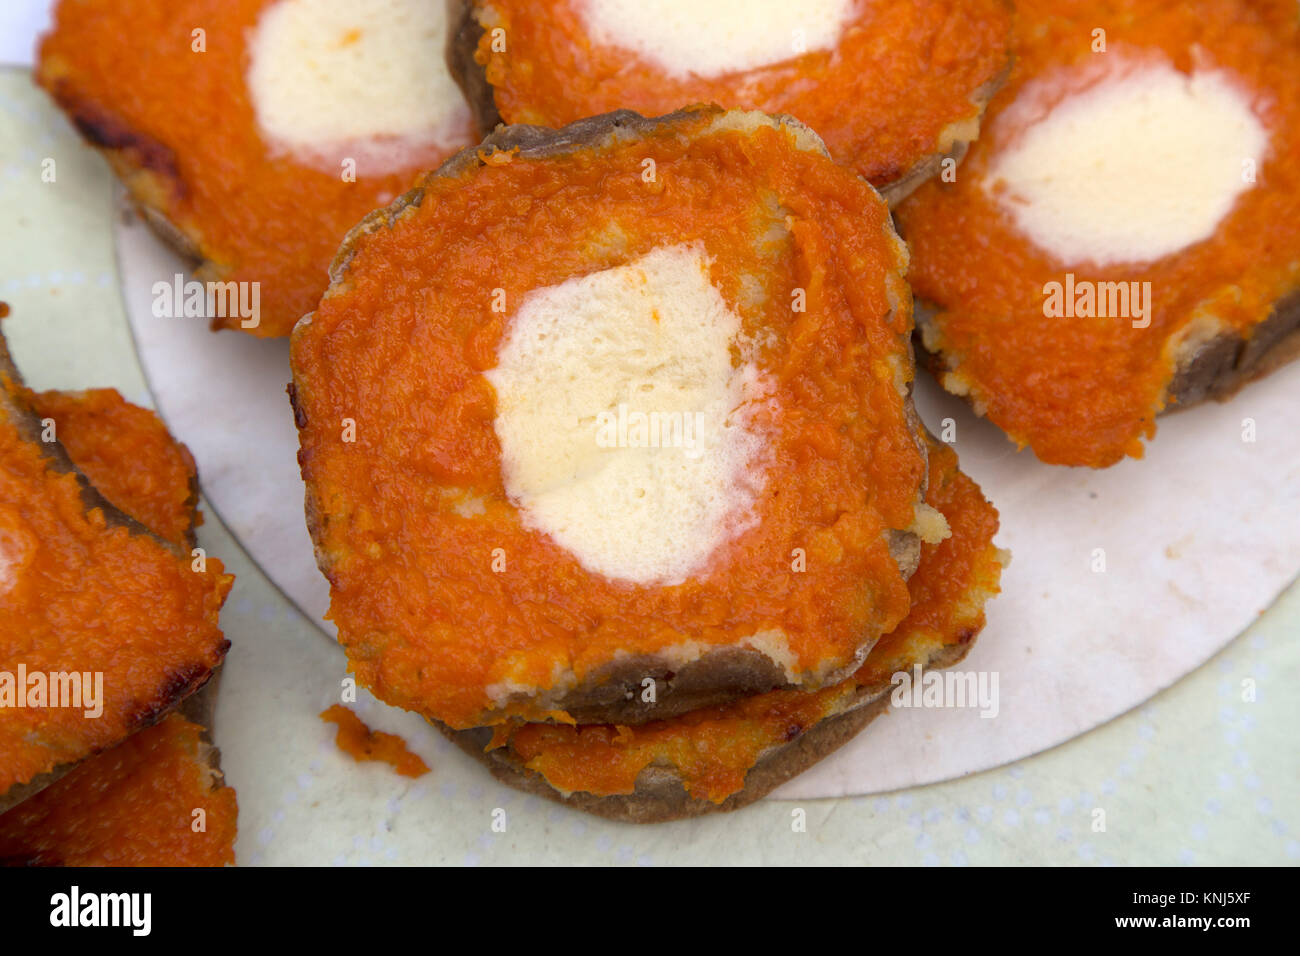 Orange cakes on sale at a Christmas market in Riga, Latvia. The cakes have a dollop of cream in them. Stock Photo